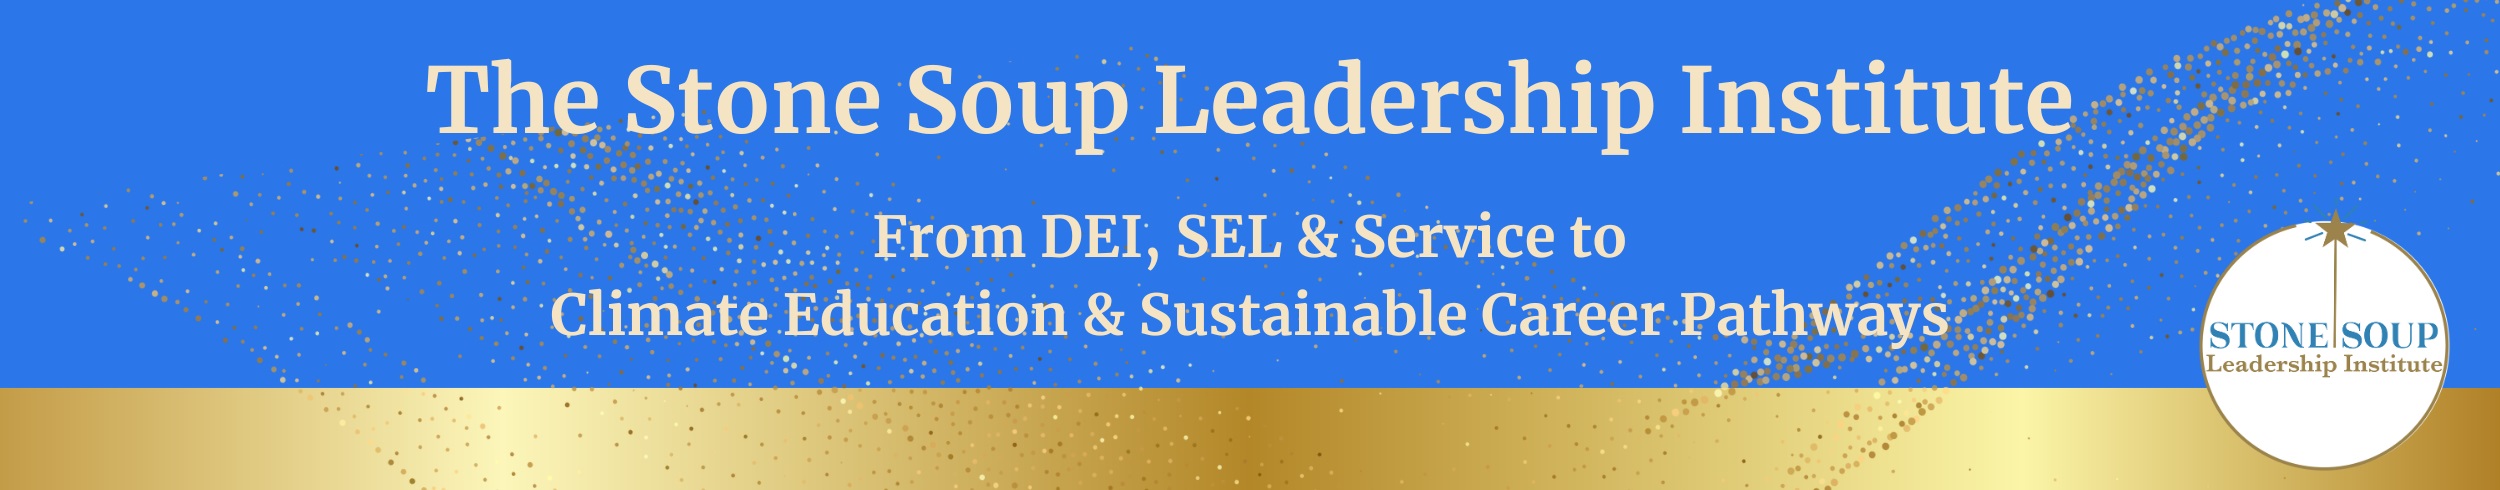 The Stone Soup Leadership Institute: Touchstone Leader's Platform